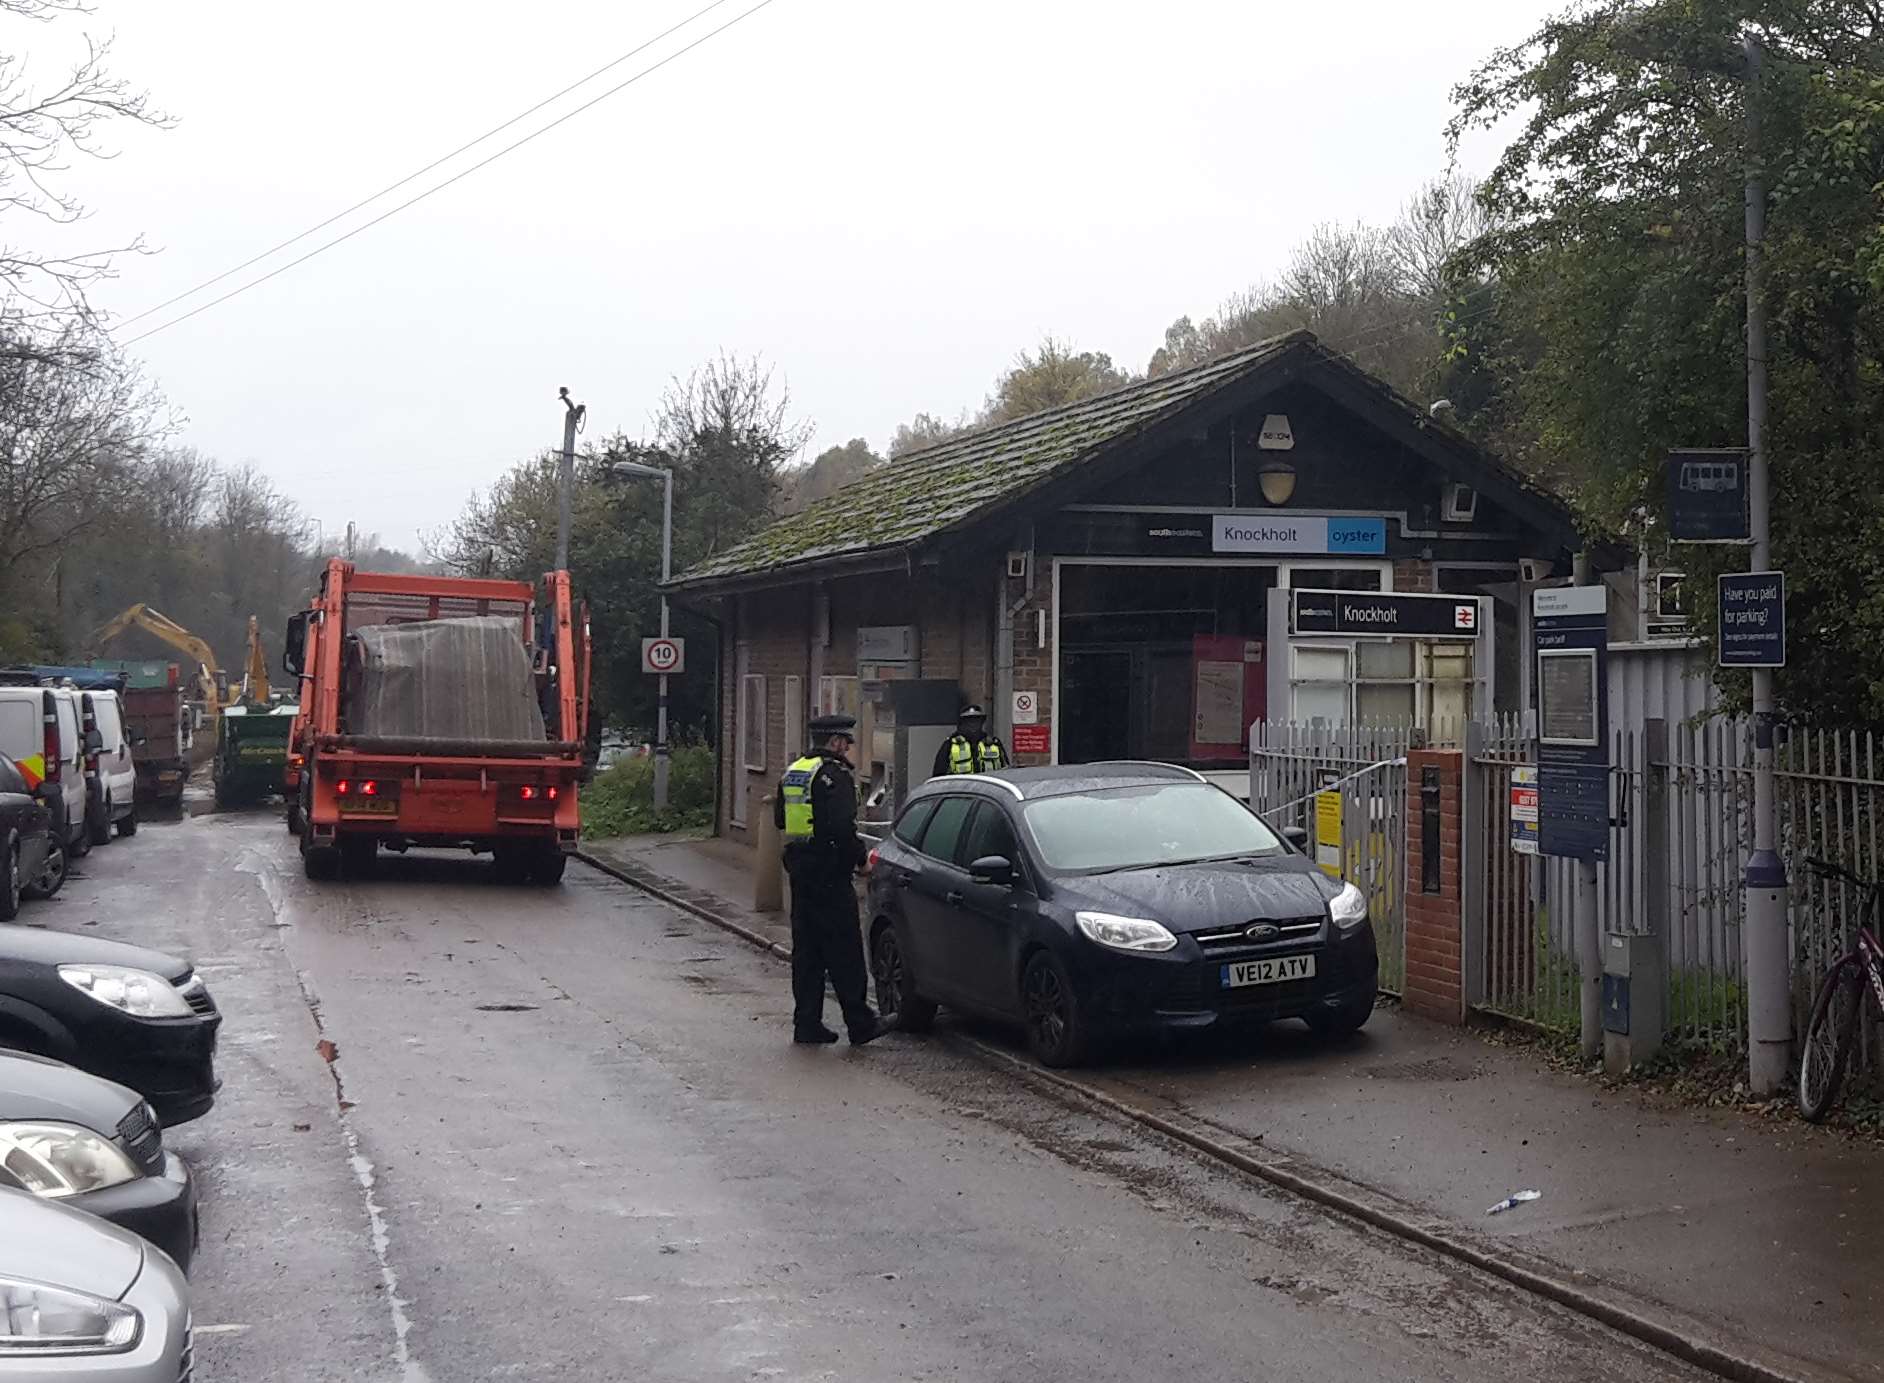 A murder investigation has been launched after a man's body was found on tracks at Knockholt